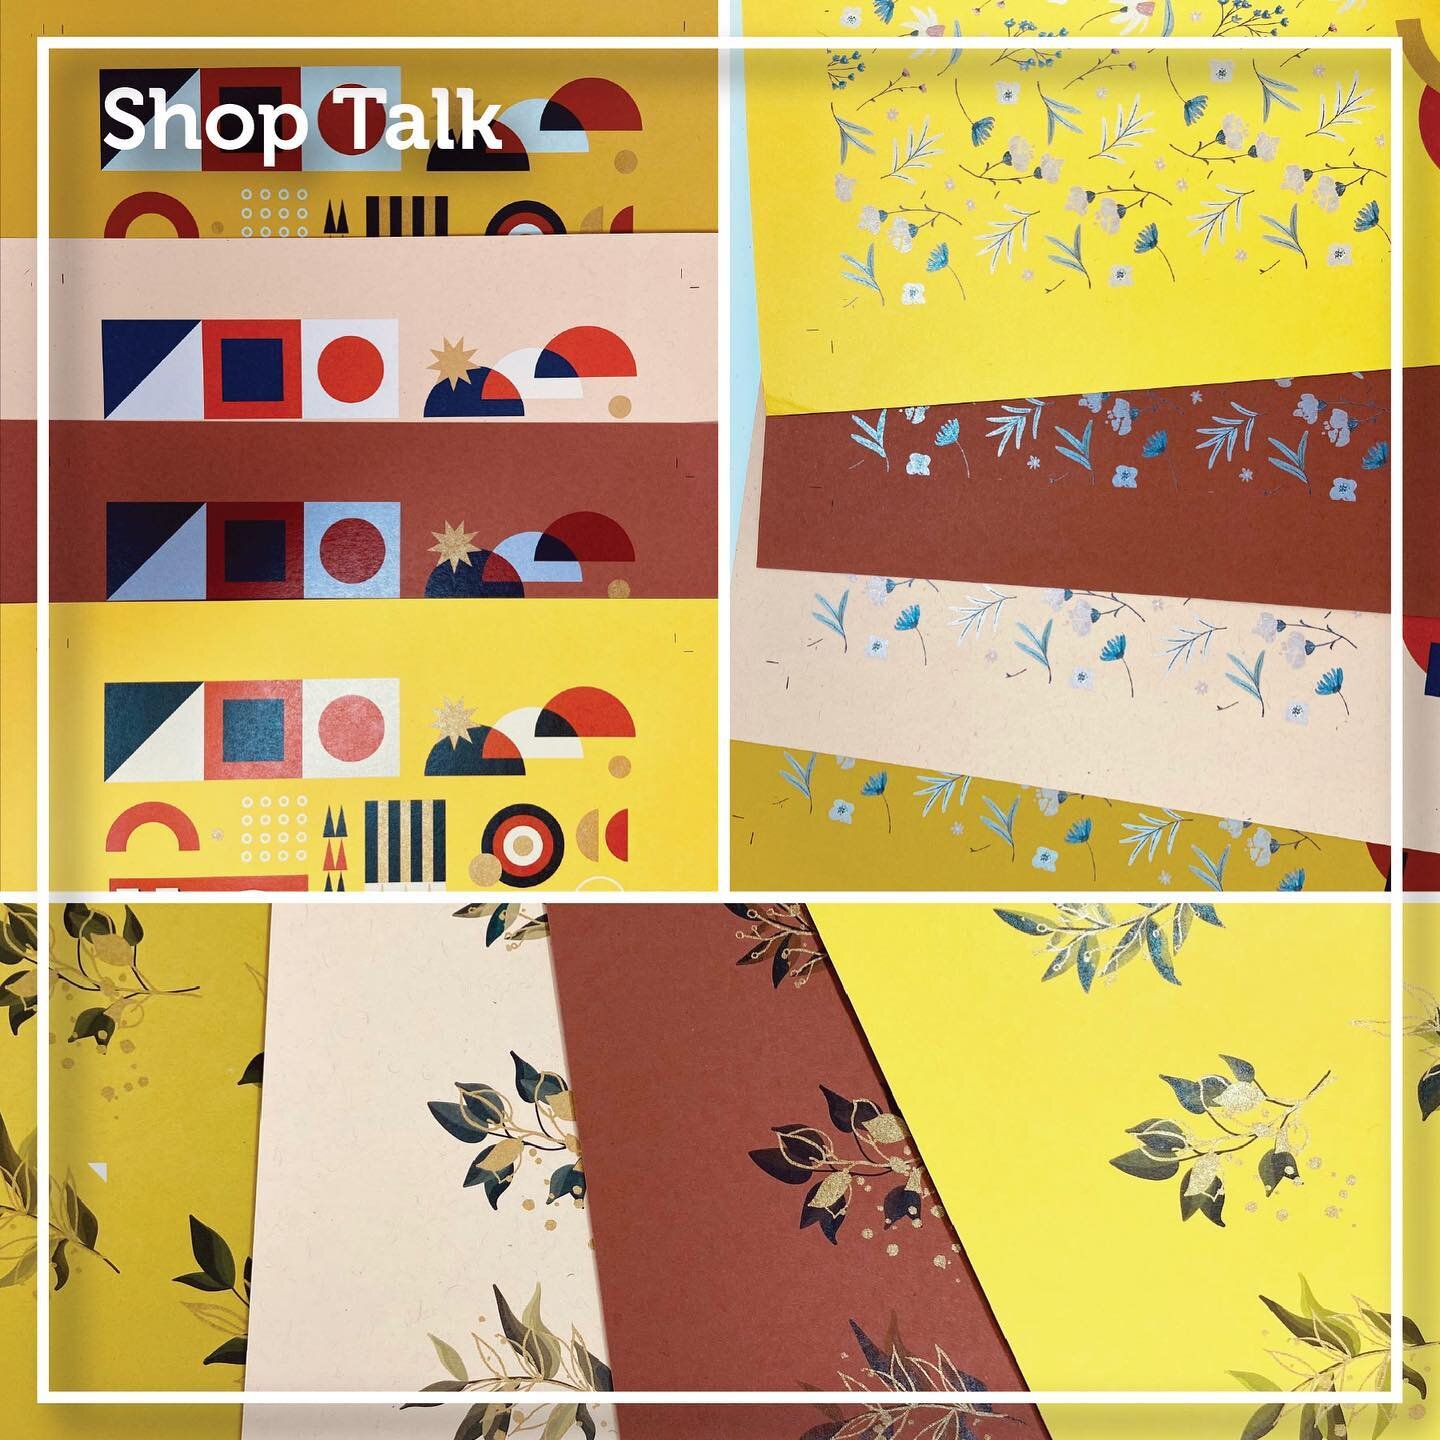 Yep, it is time for another #wpshoptalk! This is about my favorite topic: experimenting with #frenchpaper. The same art can change mood and contrast depending on the paper you use. If you set up your art using a swatch from the @frenchpaperco catalog